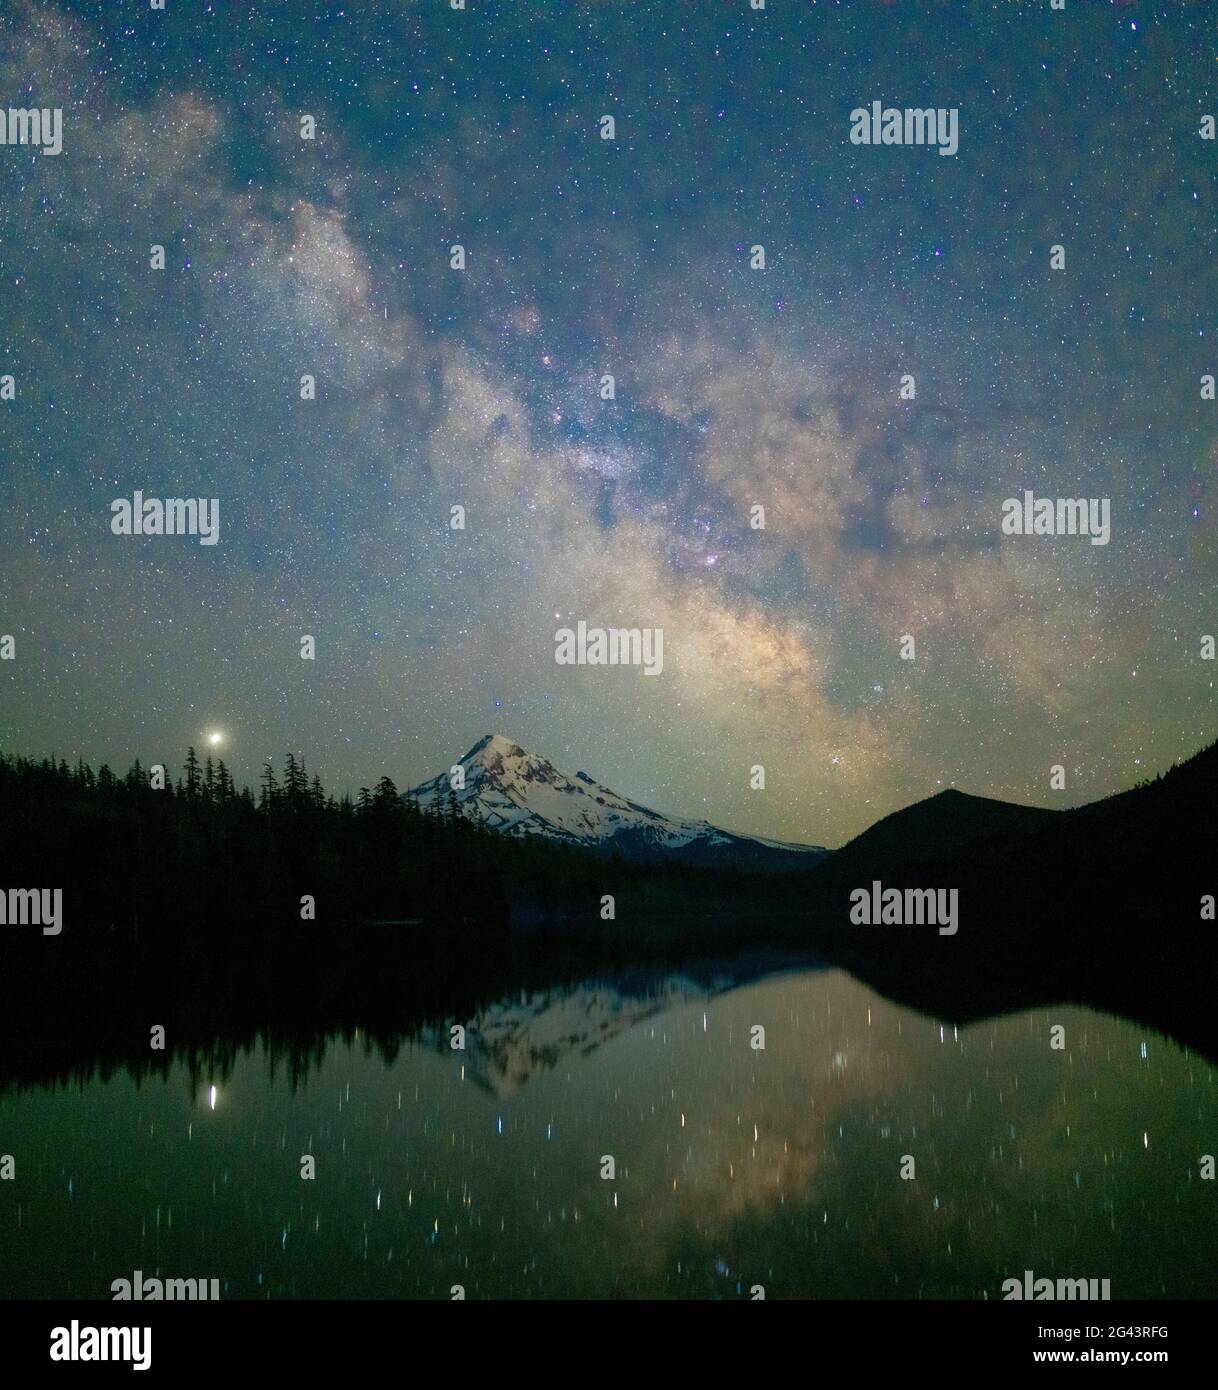 Milky Way and stars in sky at night above Mount Hood and Lost Lake, Oregon, USA Stock Photo